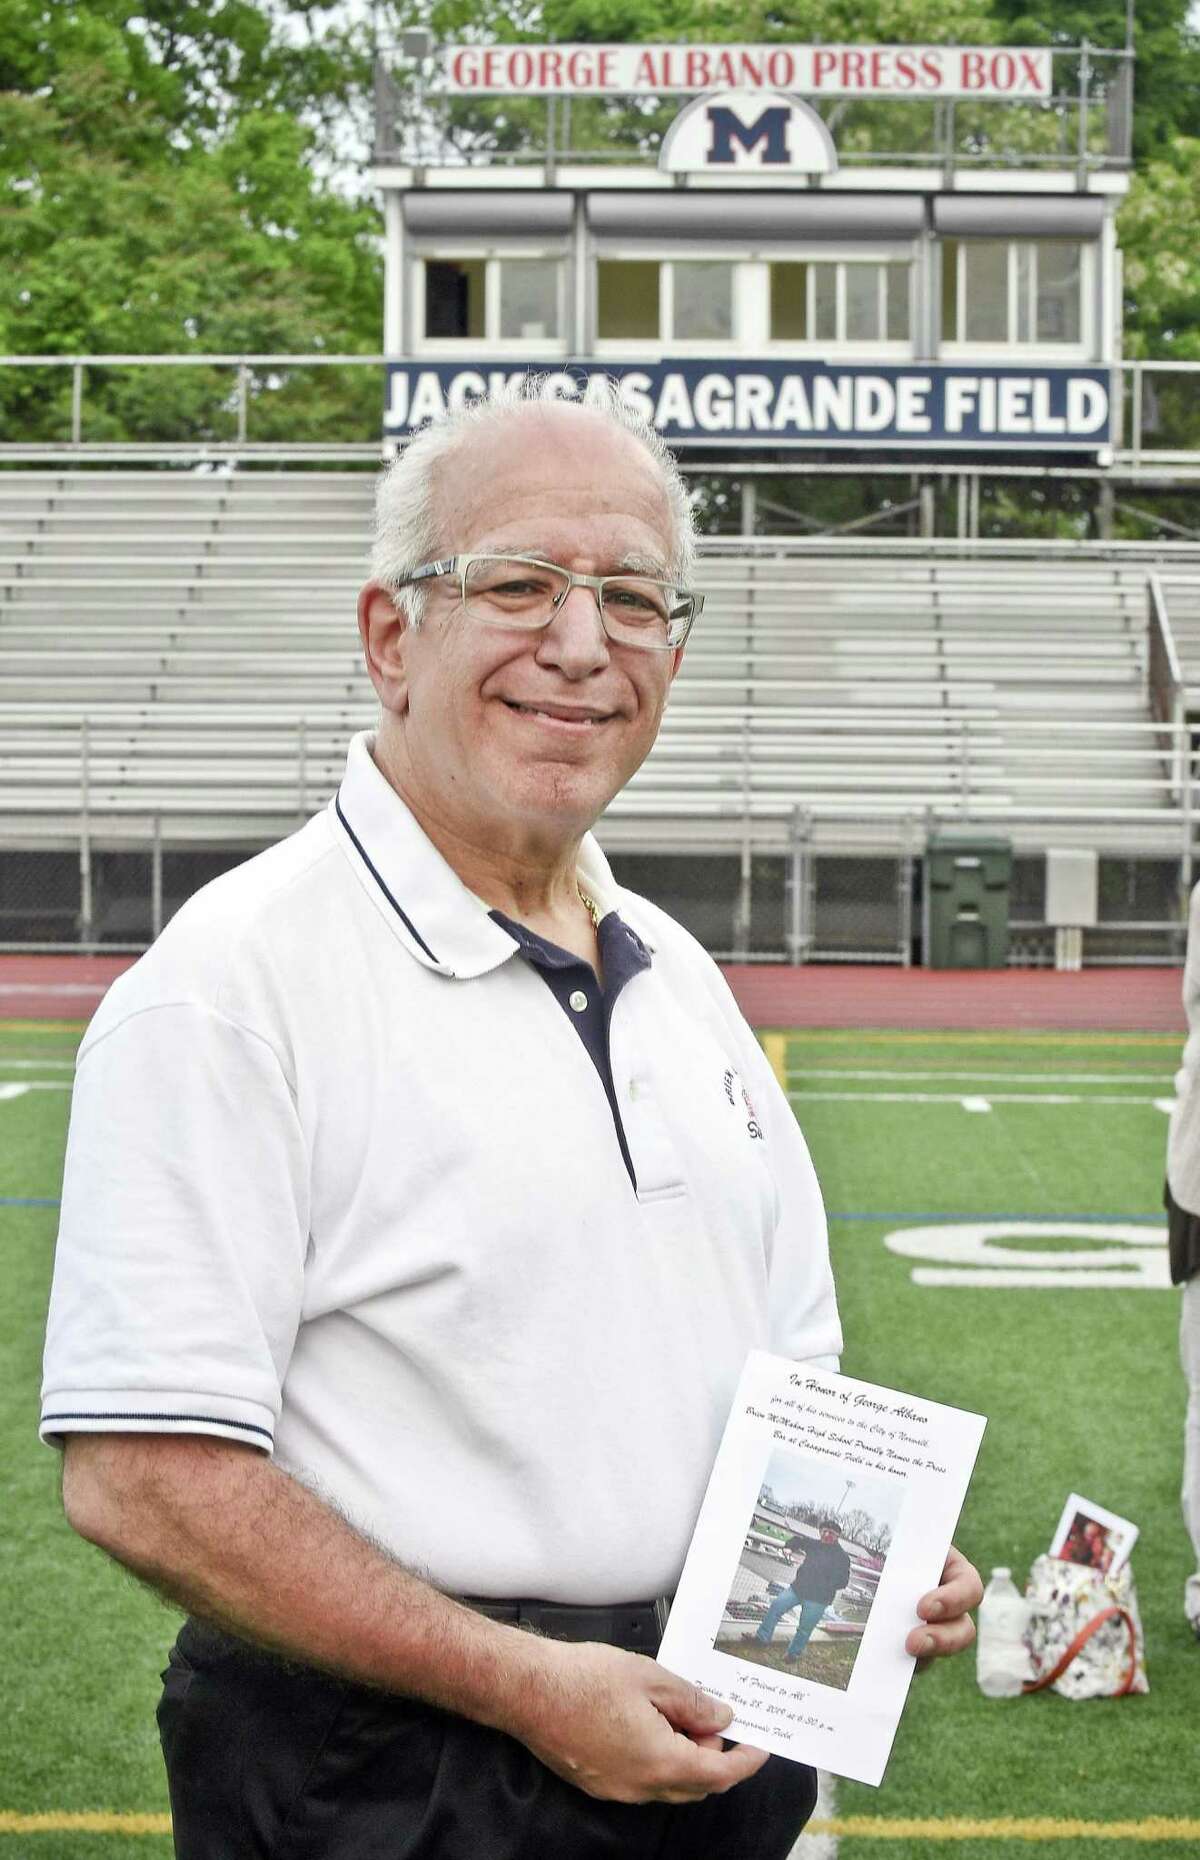 Longtime former Hour sports writer and columnist George Albano is honored with the naming of the press box at Brien McMahon High School’s Jack Casagrande Field on Tuesday in Norwalk.